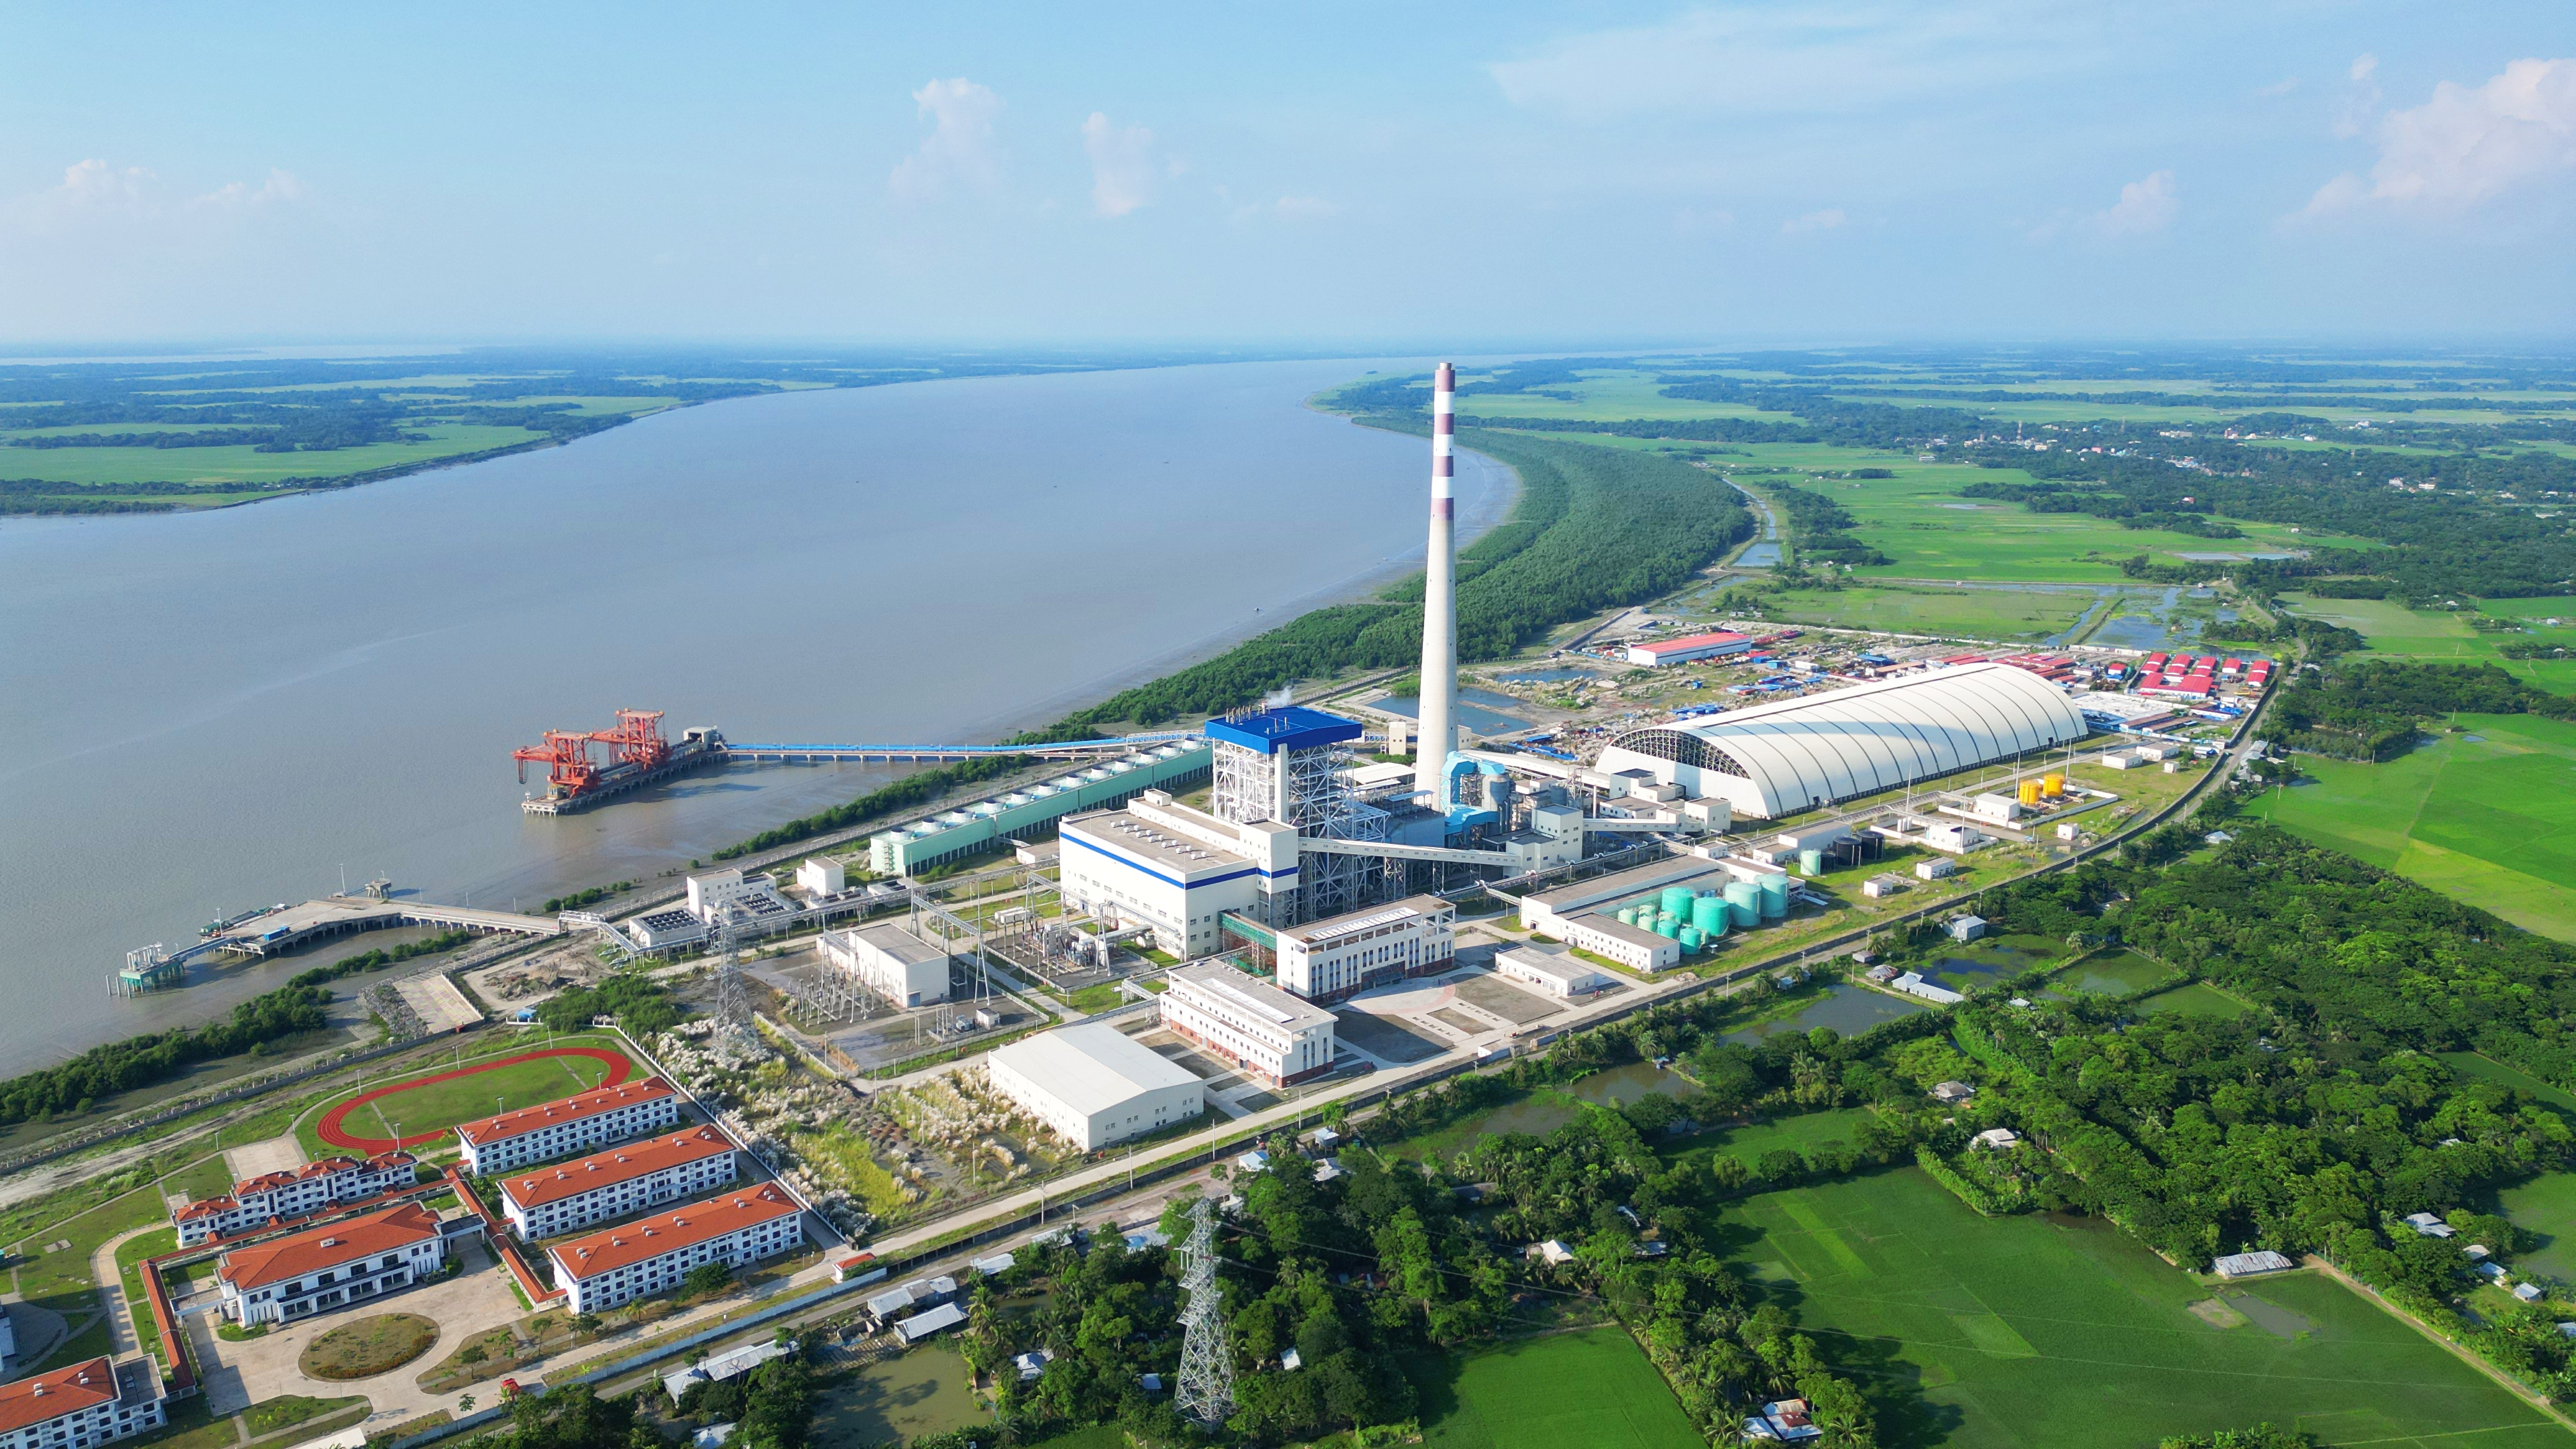 The annual cumulative power generation of Barisal power plant exceeds 1 billion kwh